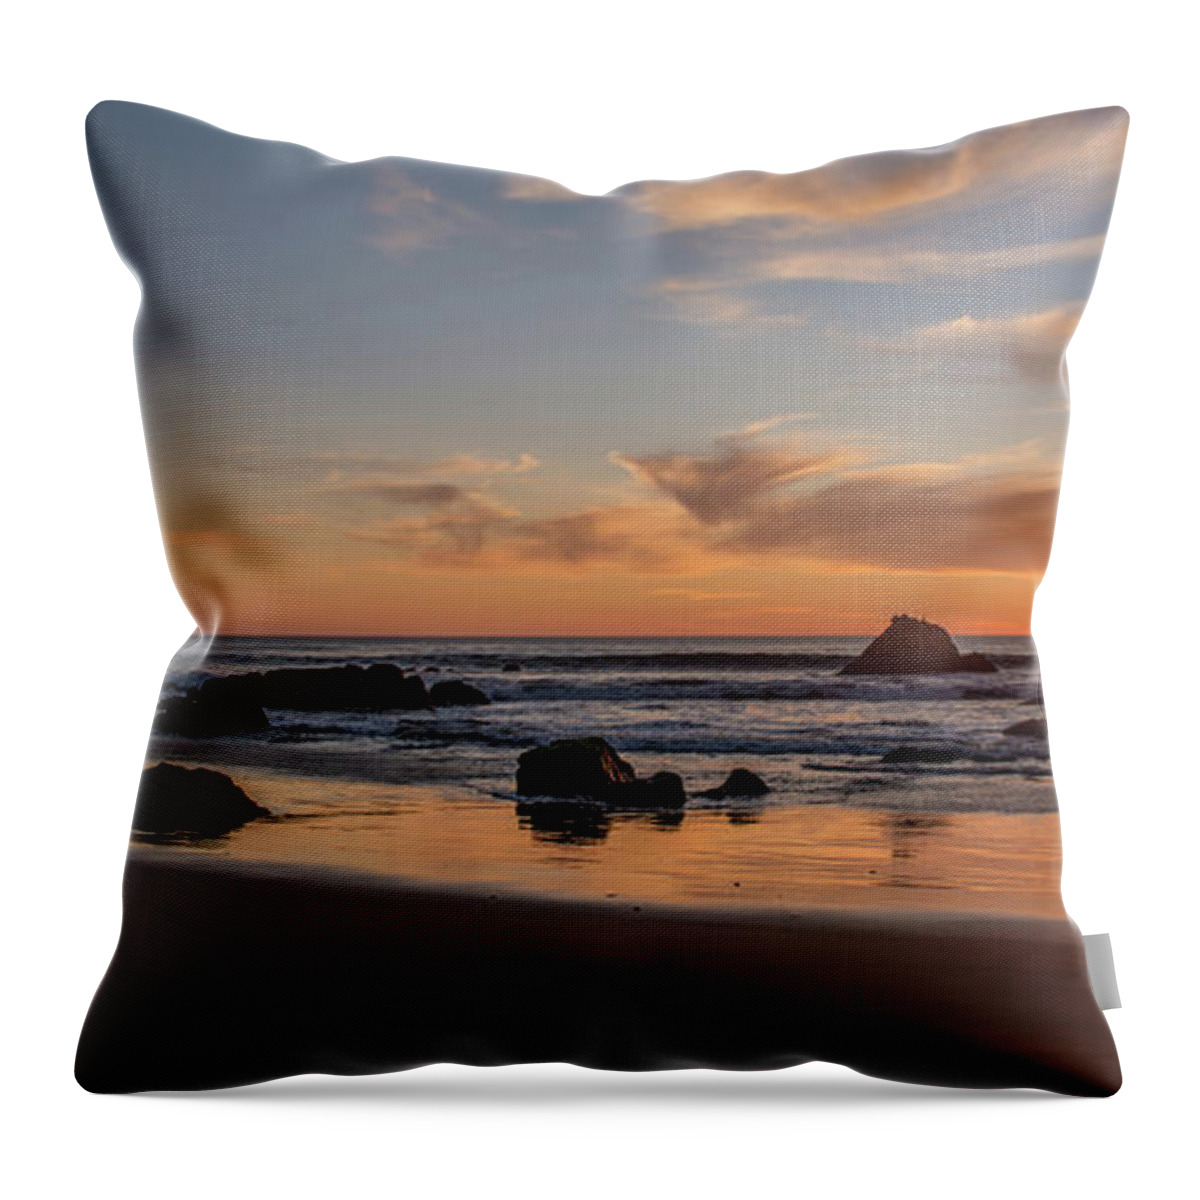 Photography Throw Pillow featuring the photograph Scenic View Of Beach At Sunset, San by Panoramic Images